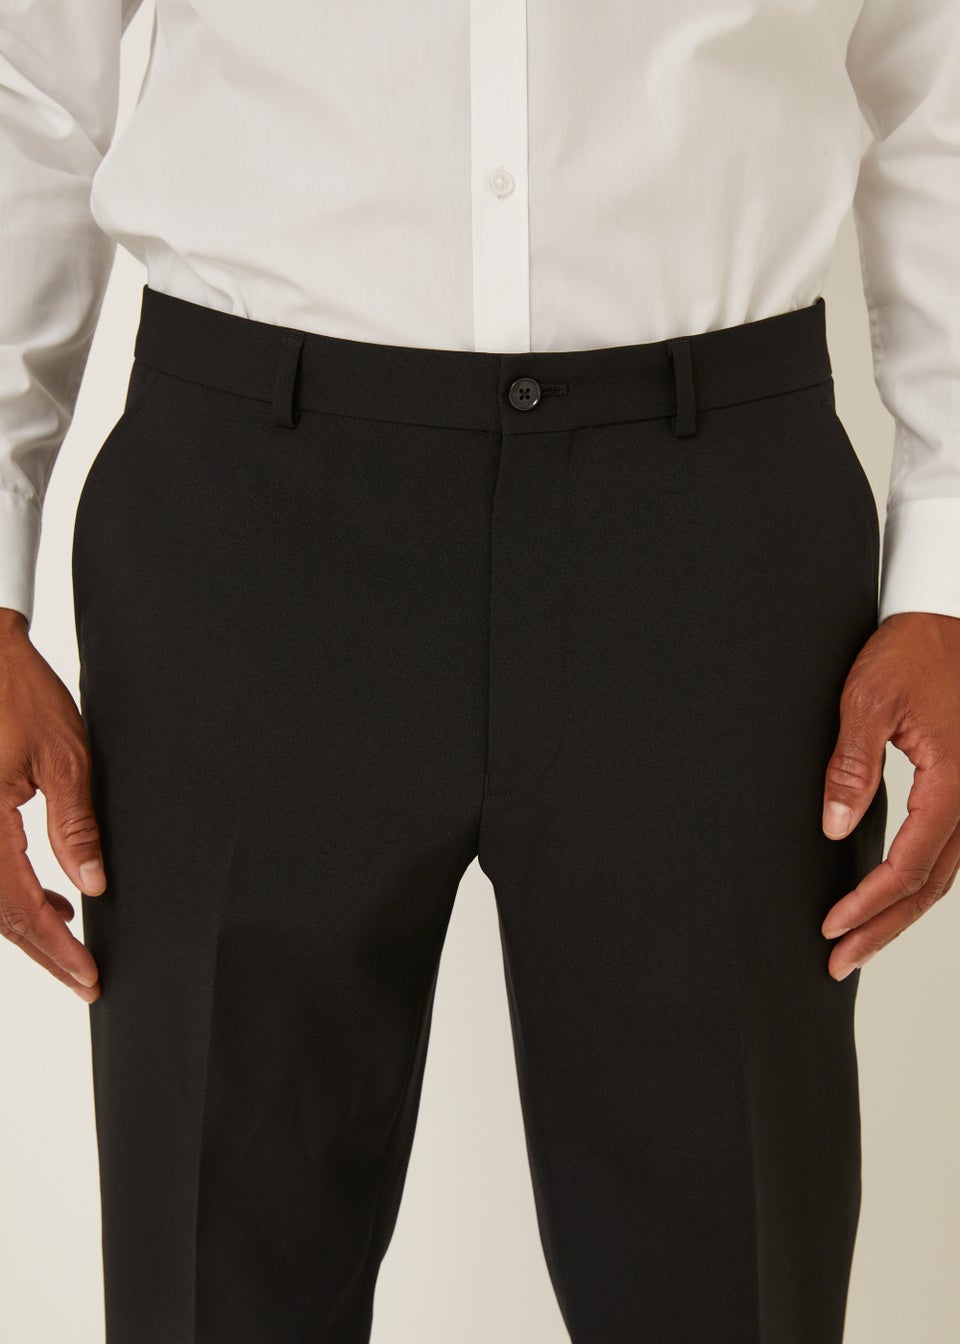 Taylor & Wright Panama Black Tailored Fit Suit Trousers - Matalan